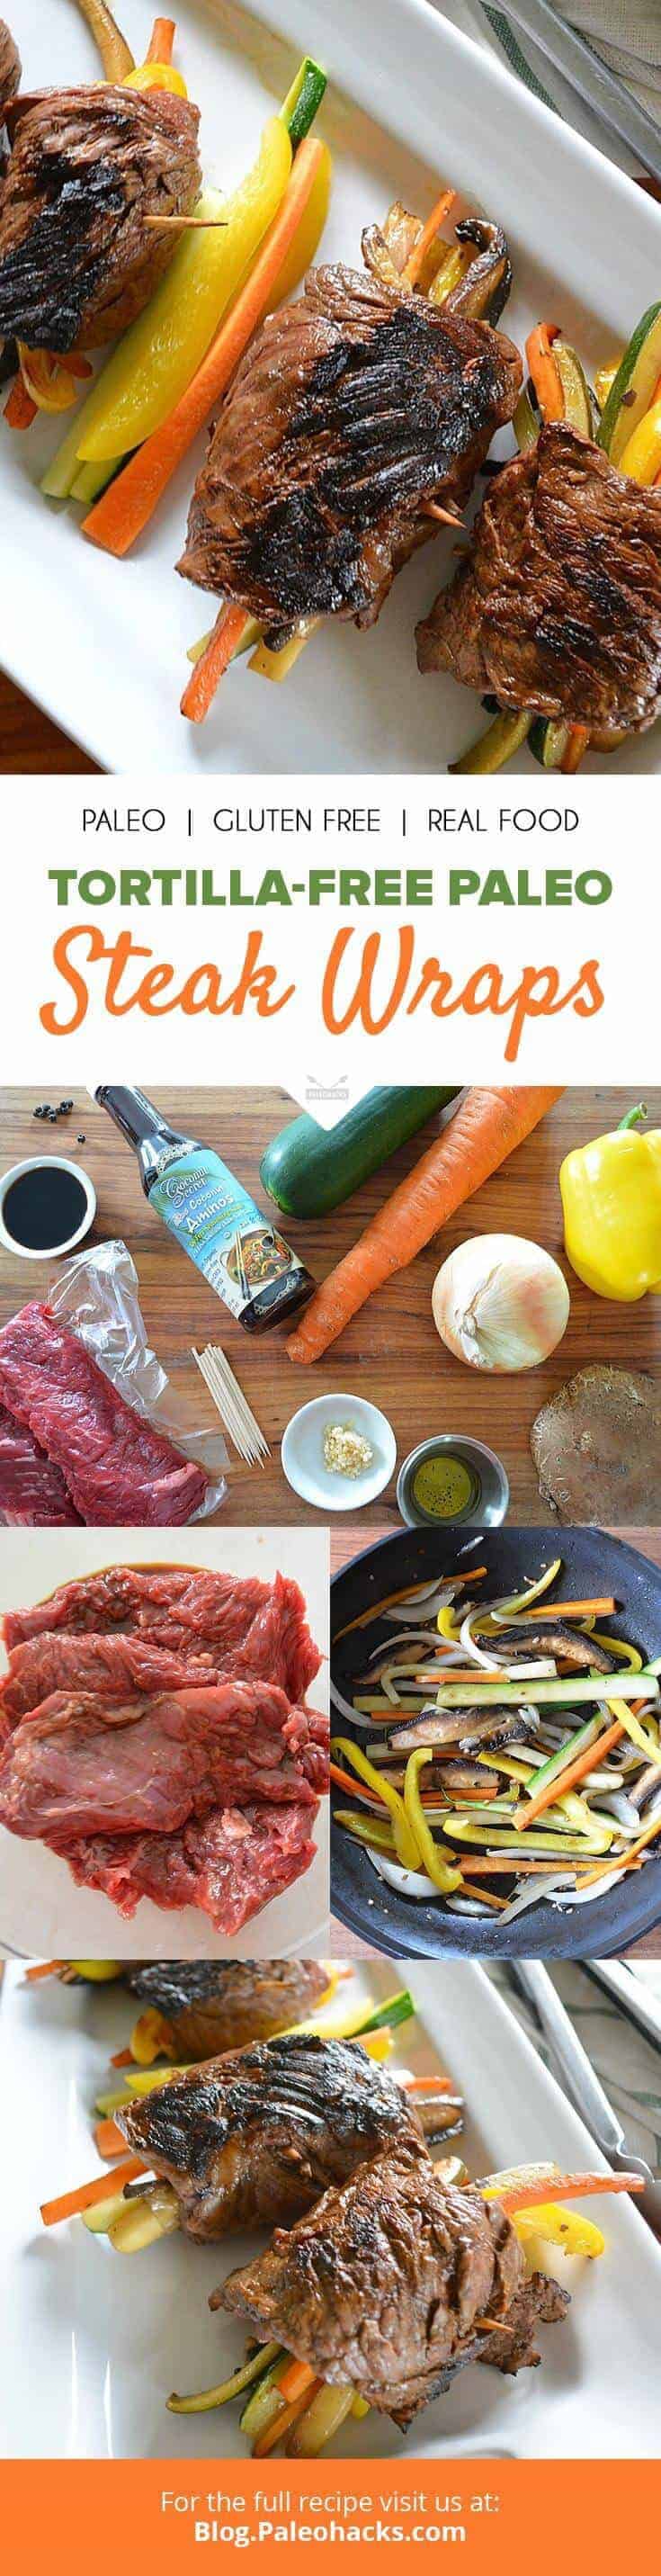 Skirt steak is the perfect versatile and inexpensive cut of beef that is great for rolling and filling with vegetables in these delectable steak wraps.